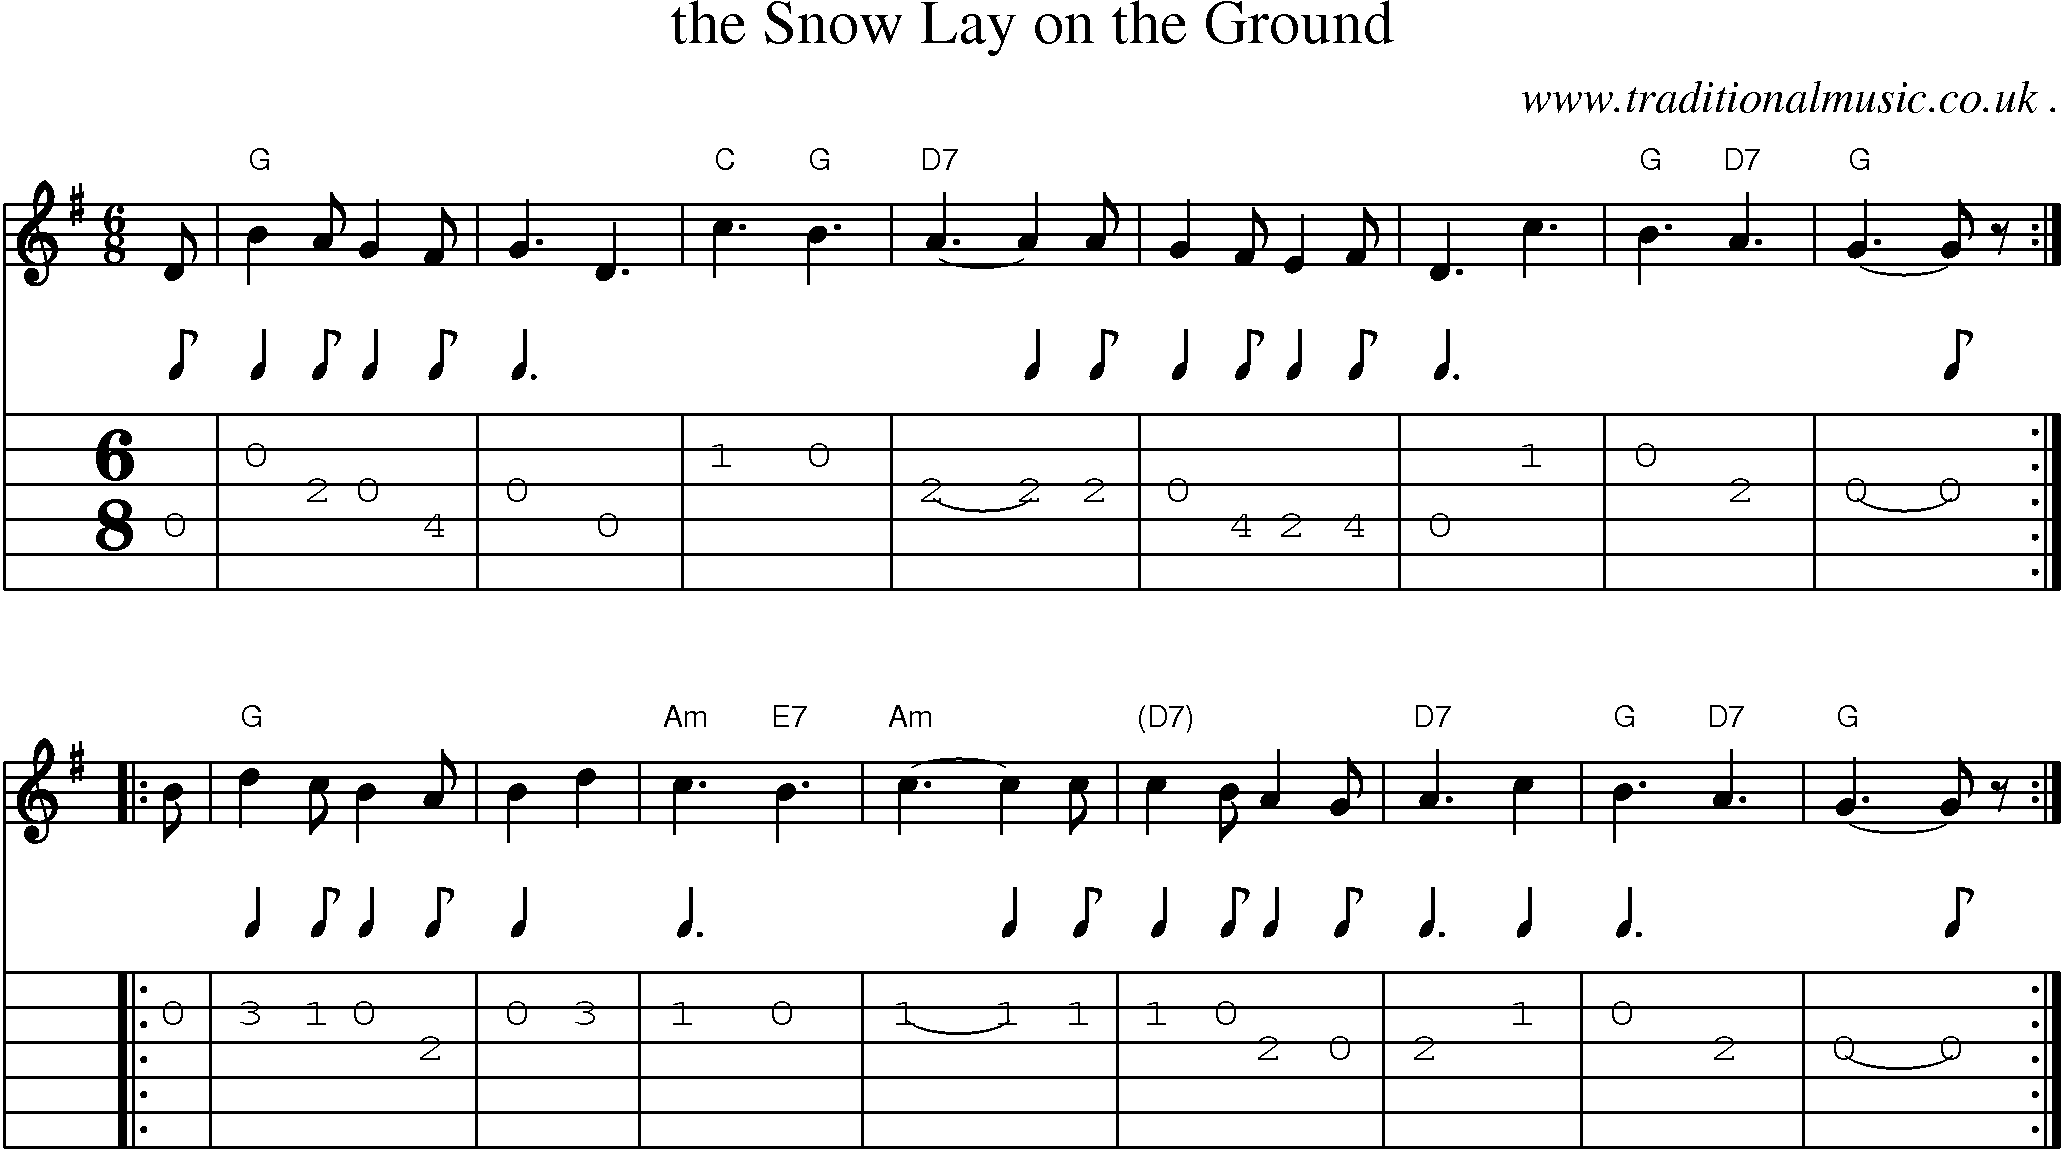 Sheet-music  score, Chords and Guitar Tabs for The Snow Lay On The Ground